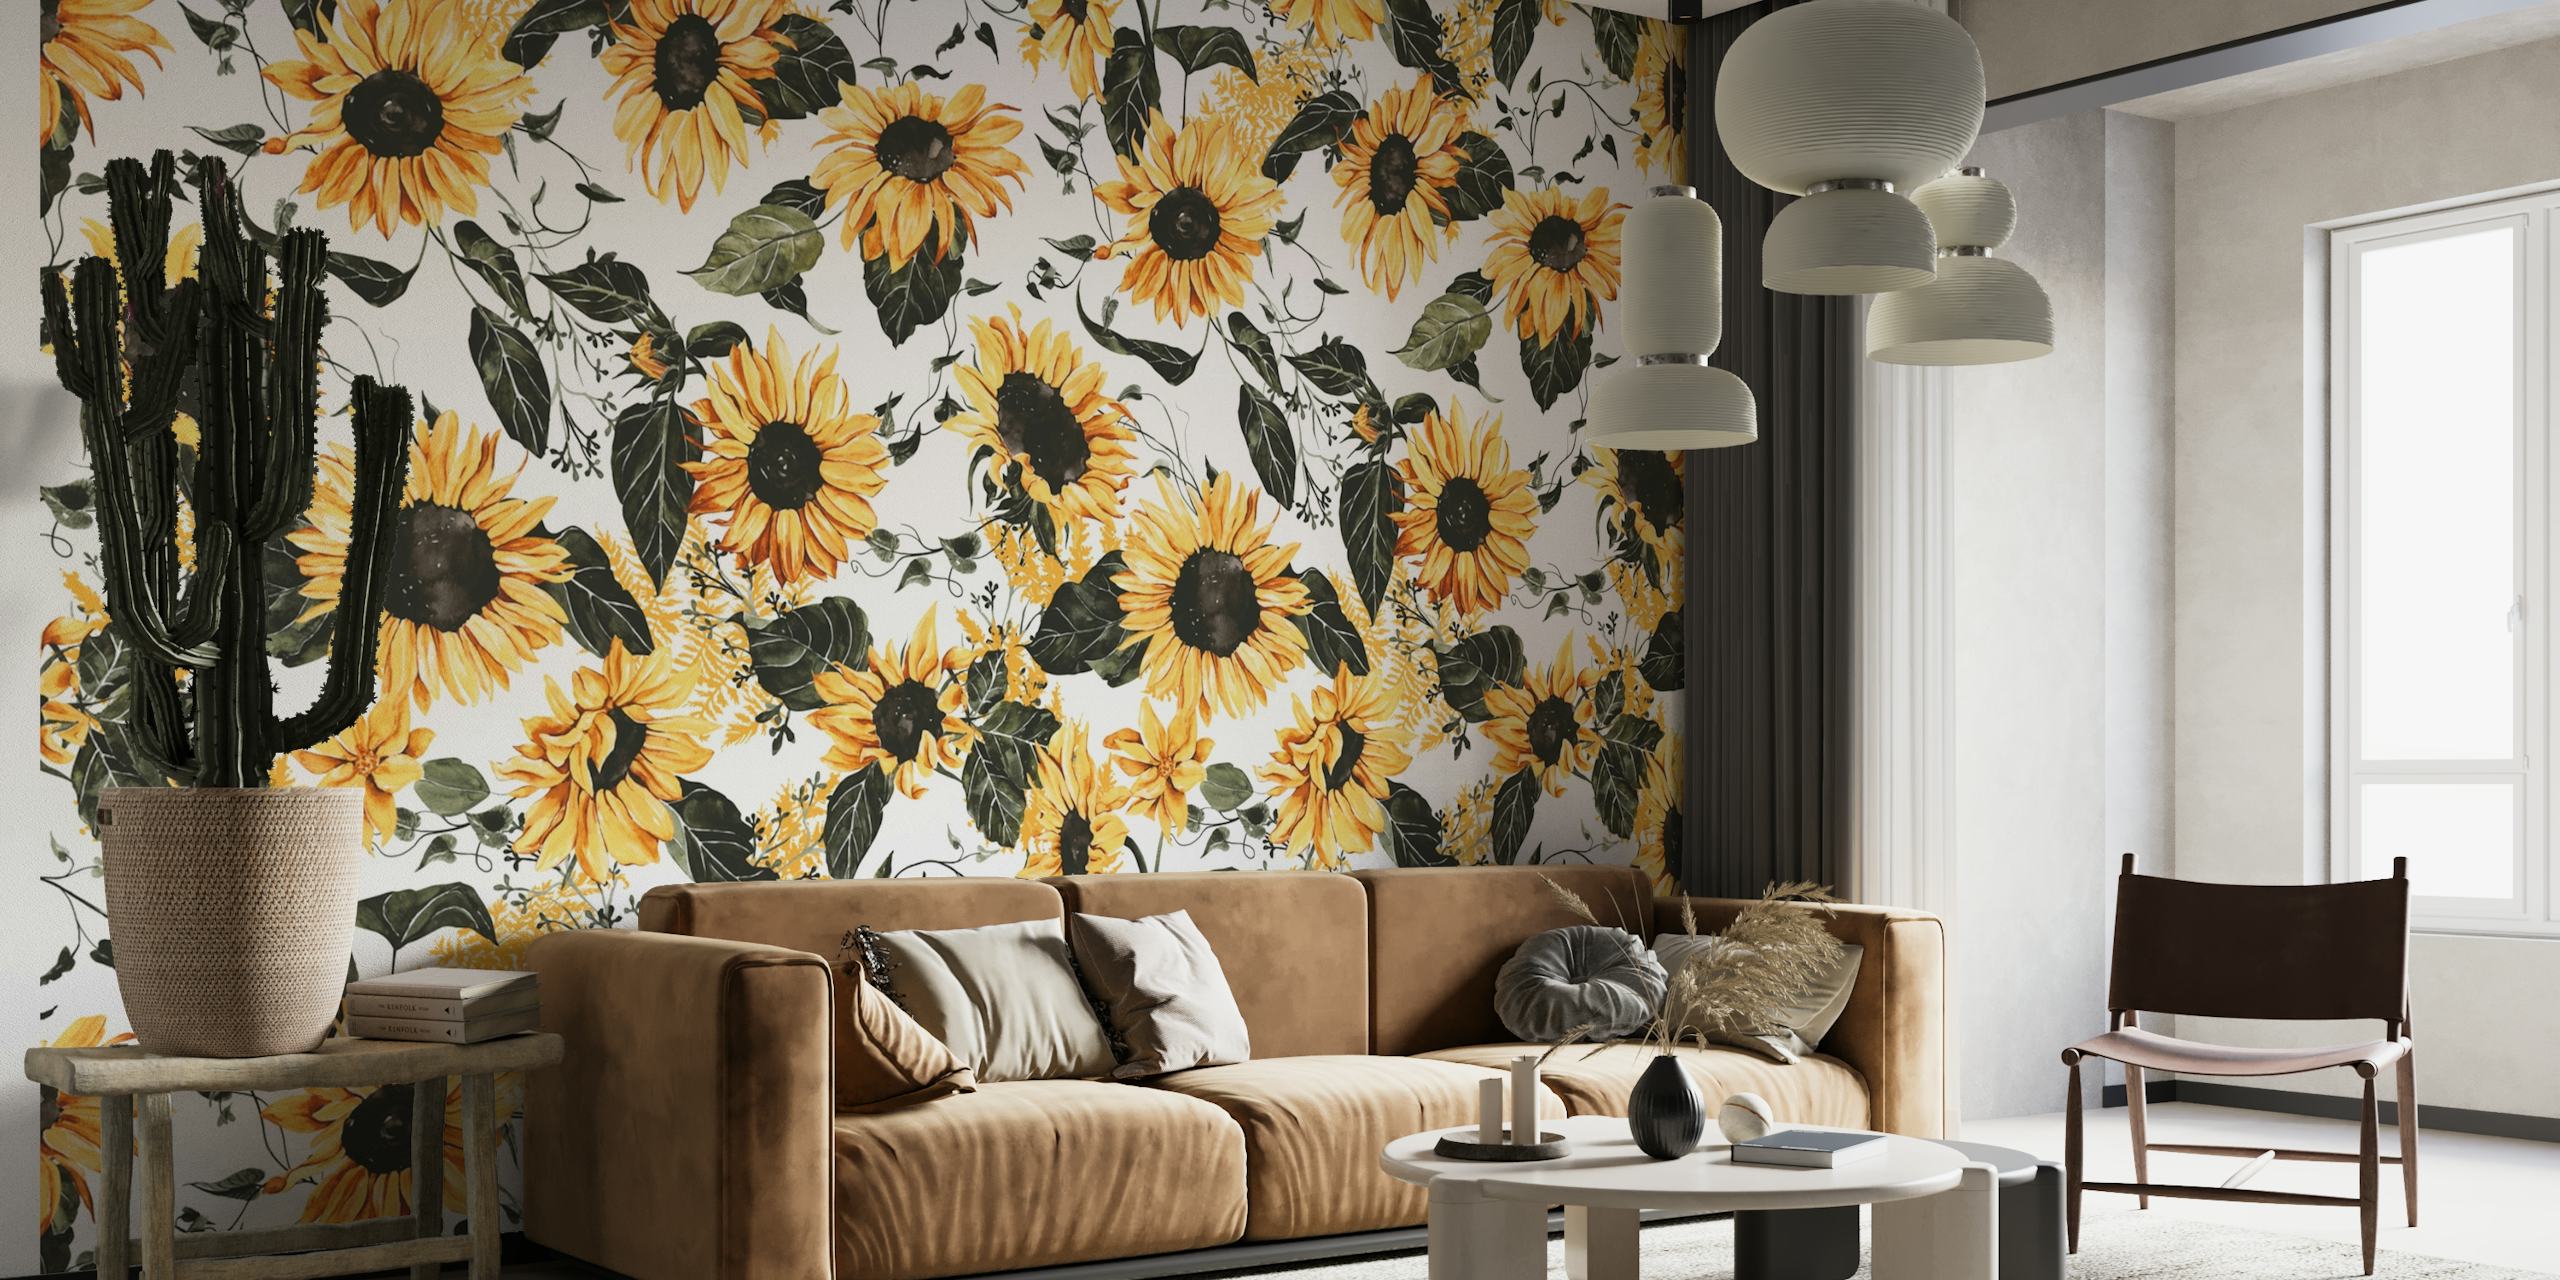 Wild Meadow Sunflowers wall mural with bright sunflowers and green leaves on a soft background.